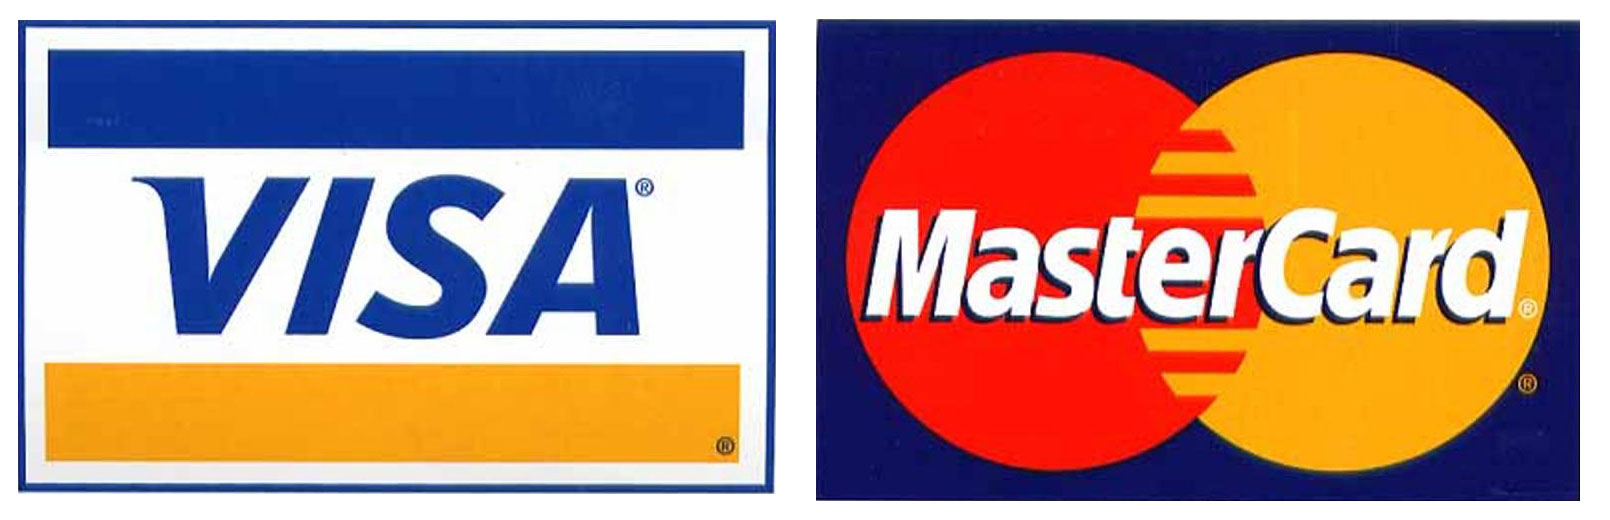 Image result for master card and visa card